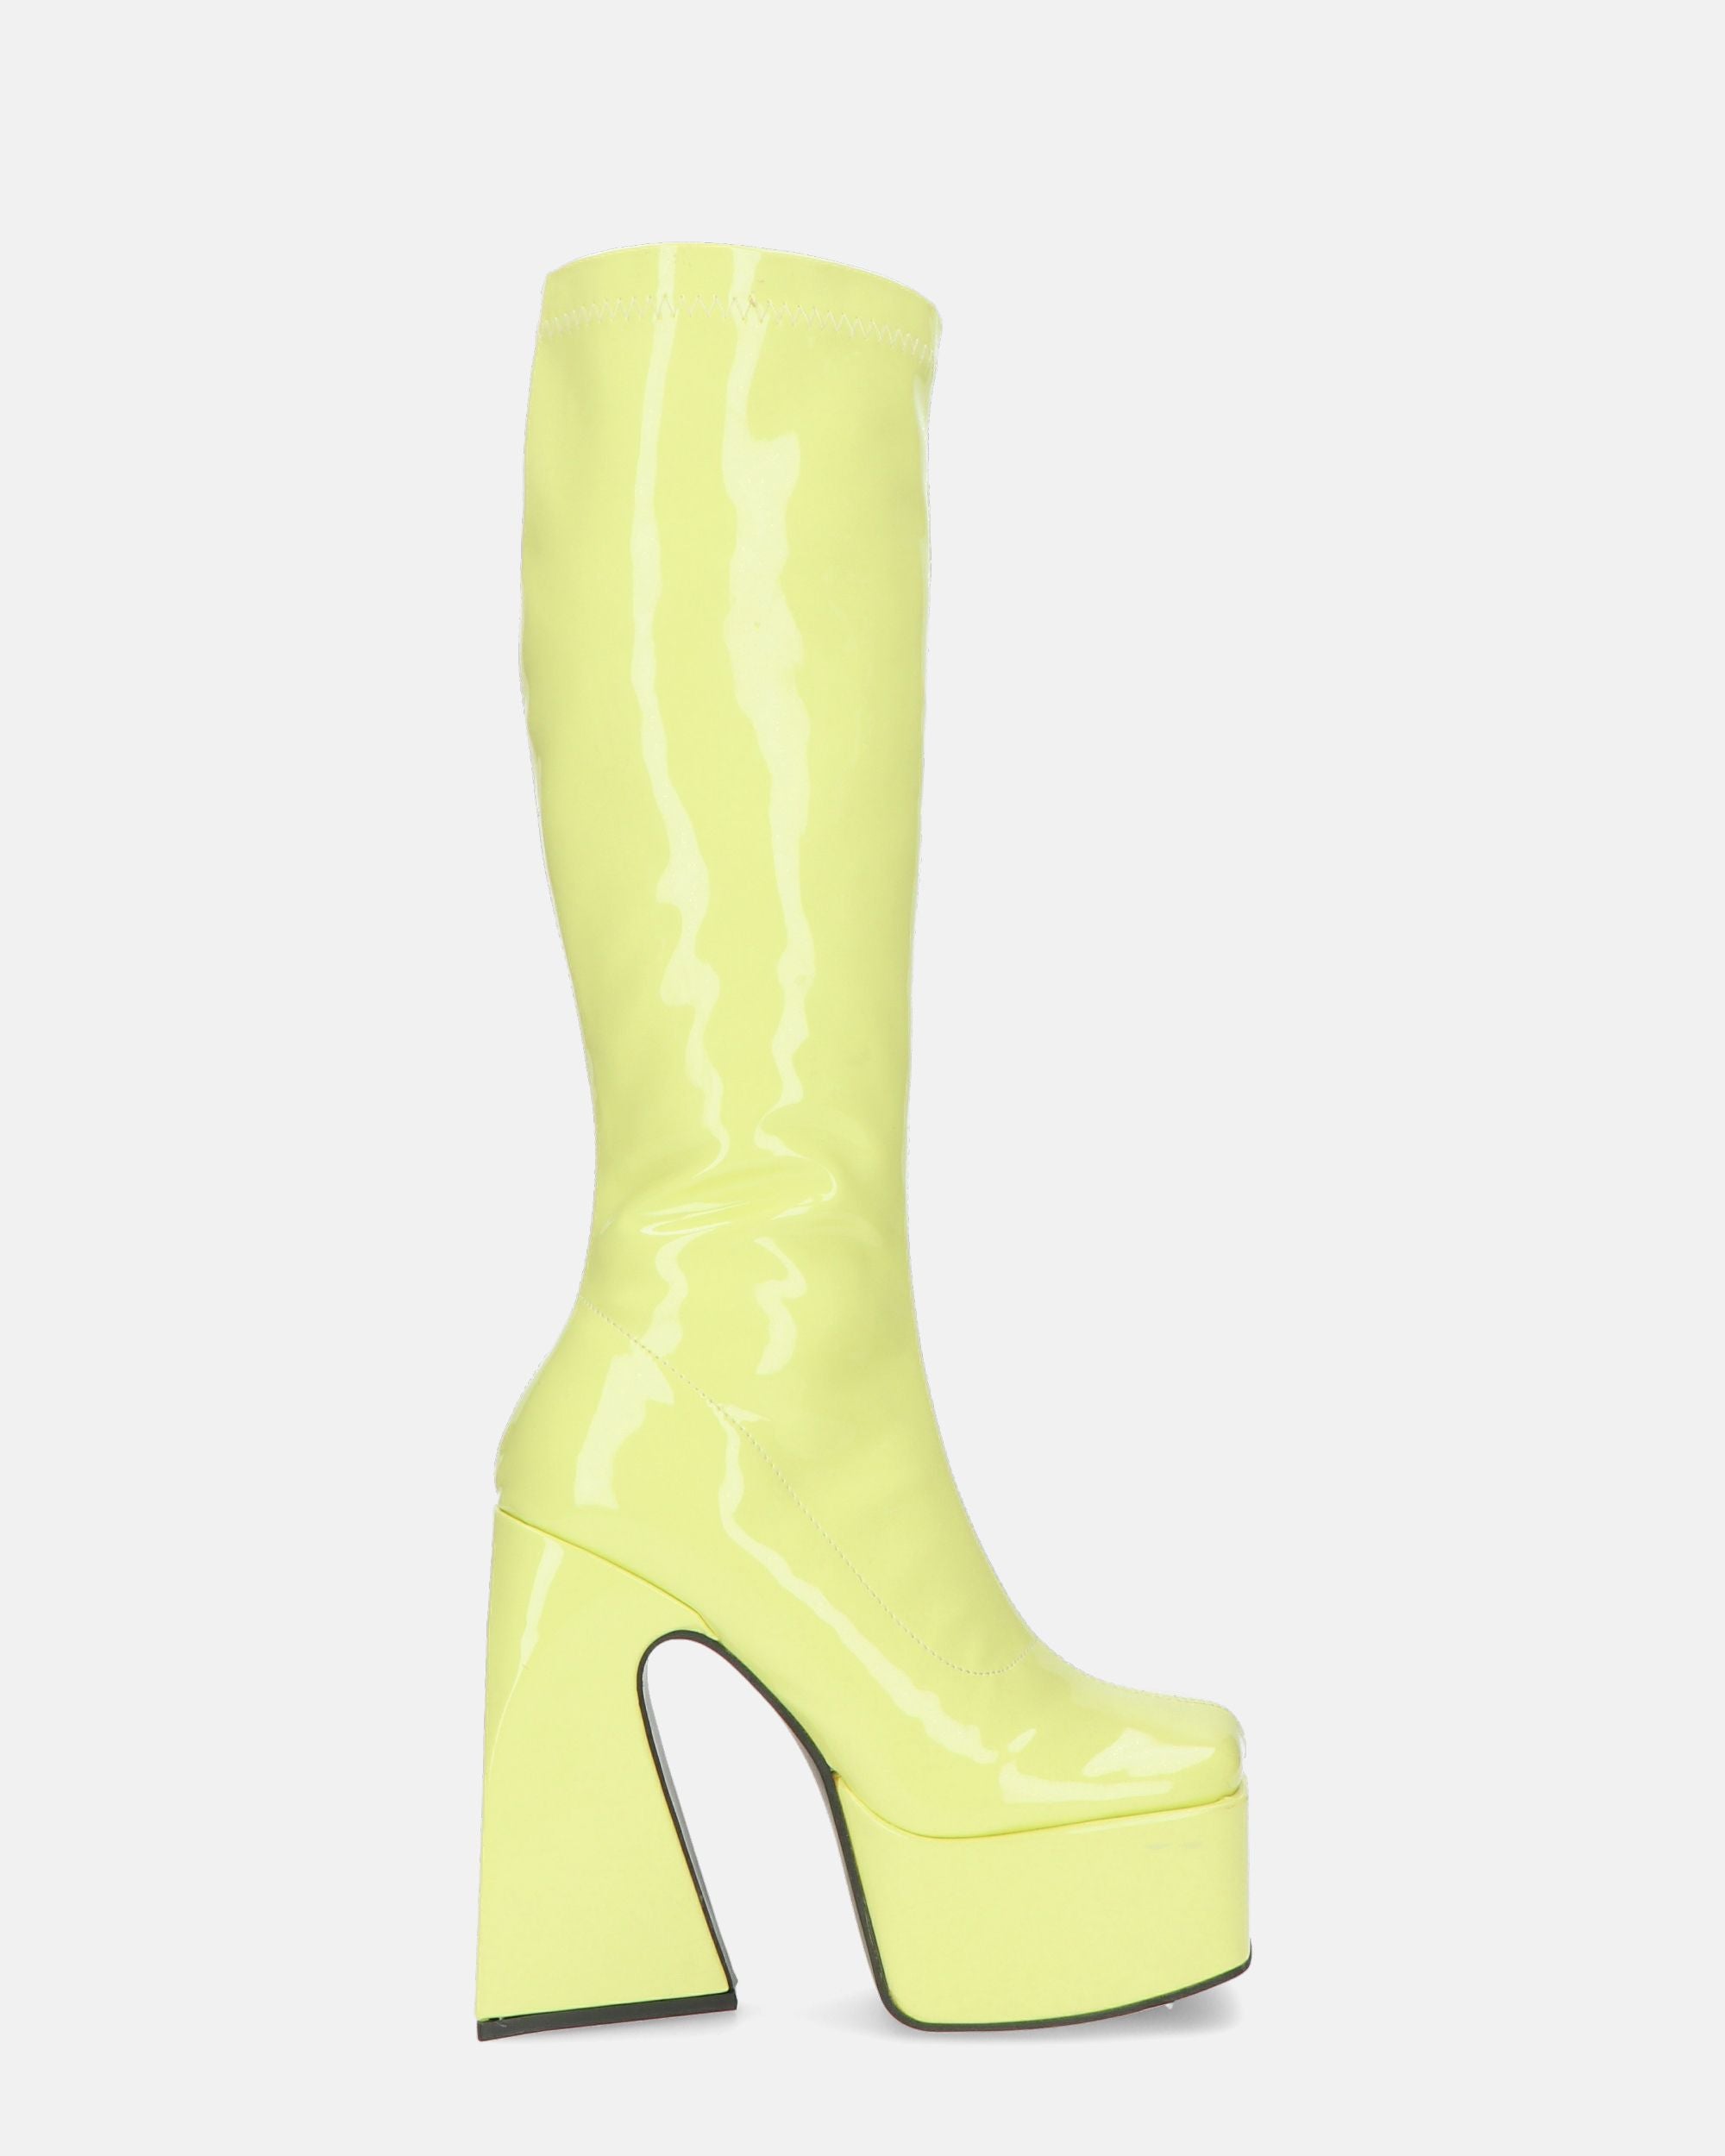 BECKA - high boots in yellow glassy with zip and square heel